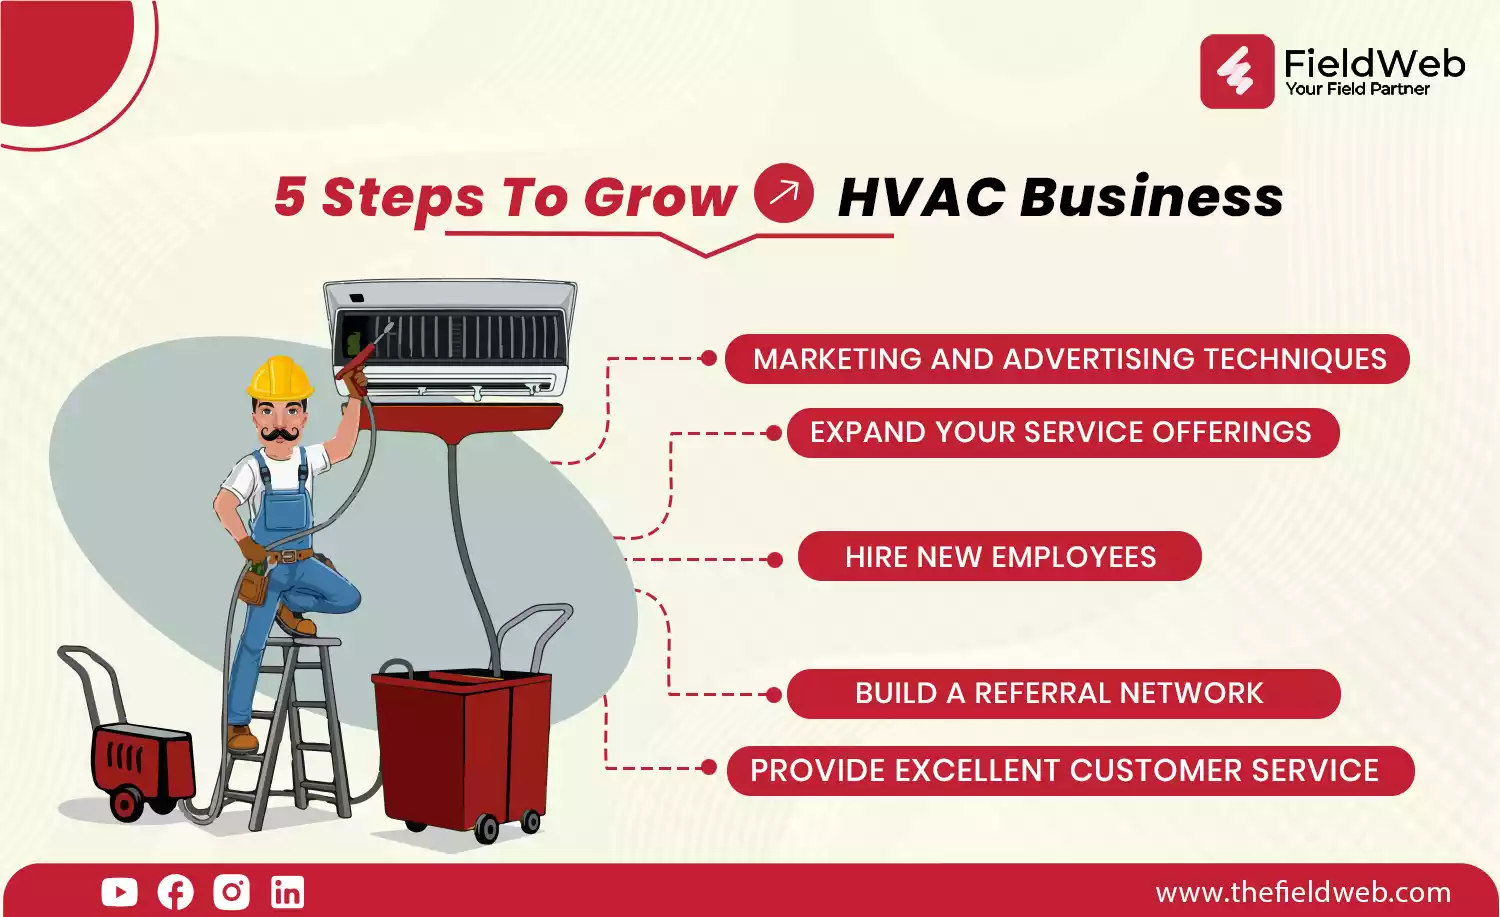 image is describing the 5 steps to grow the HVAC business